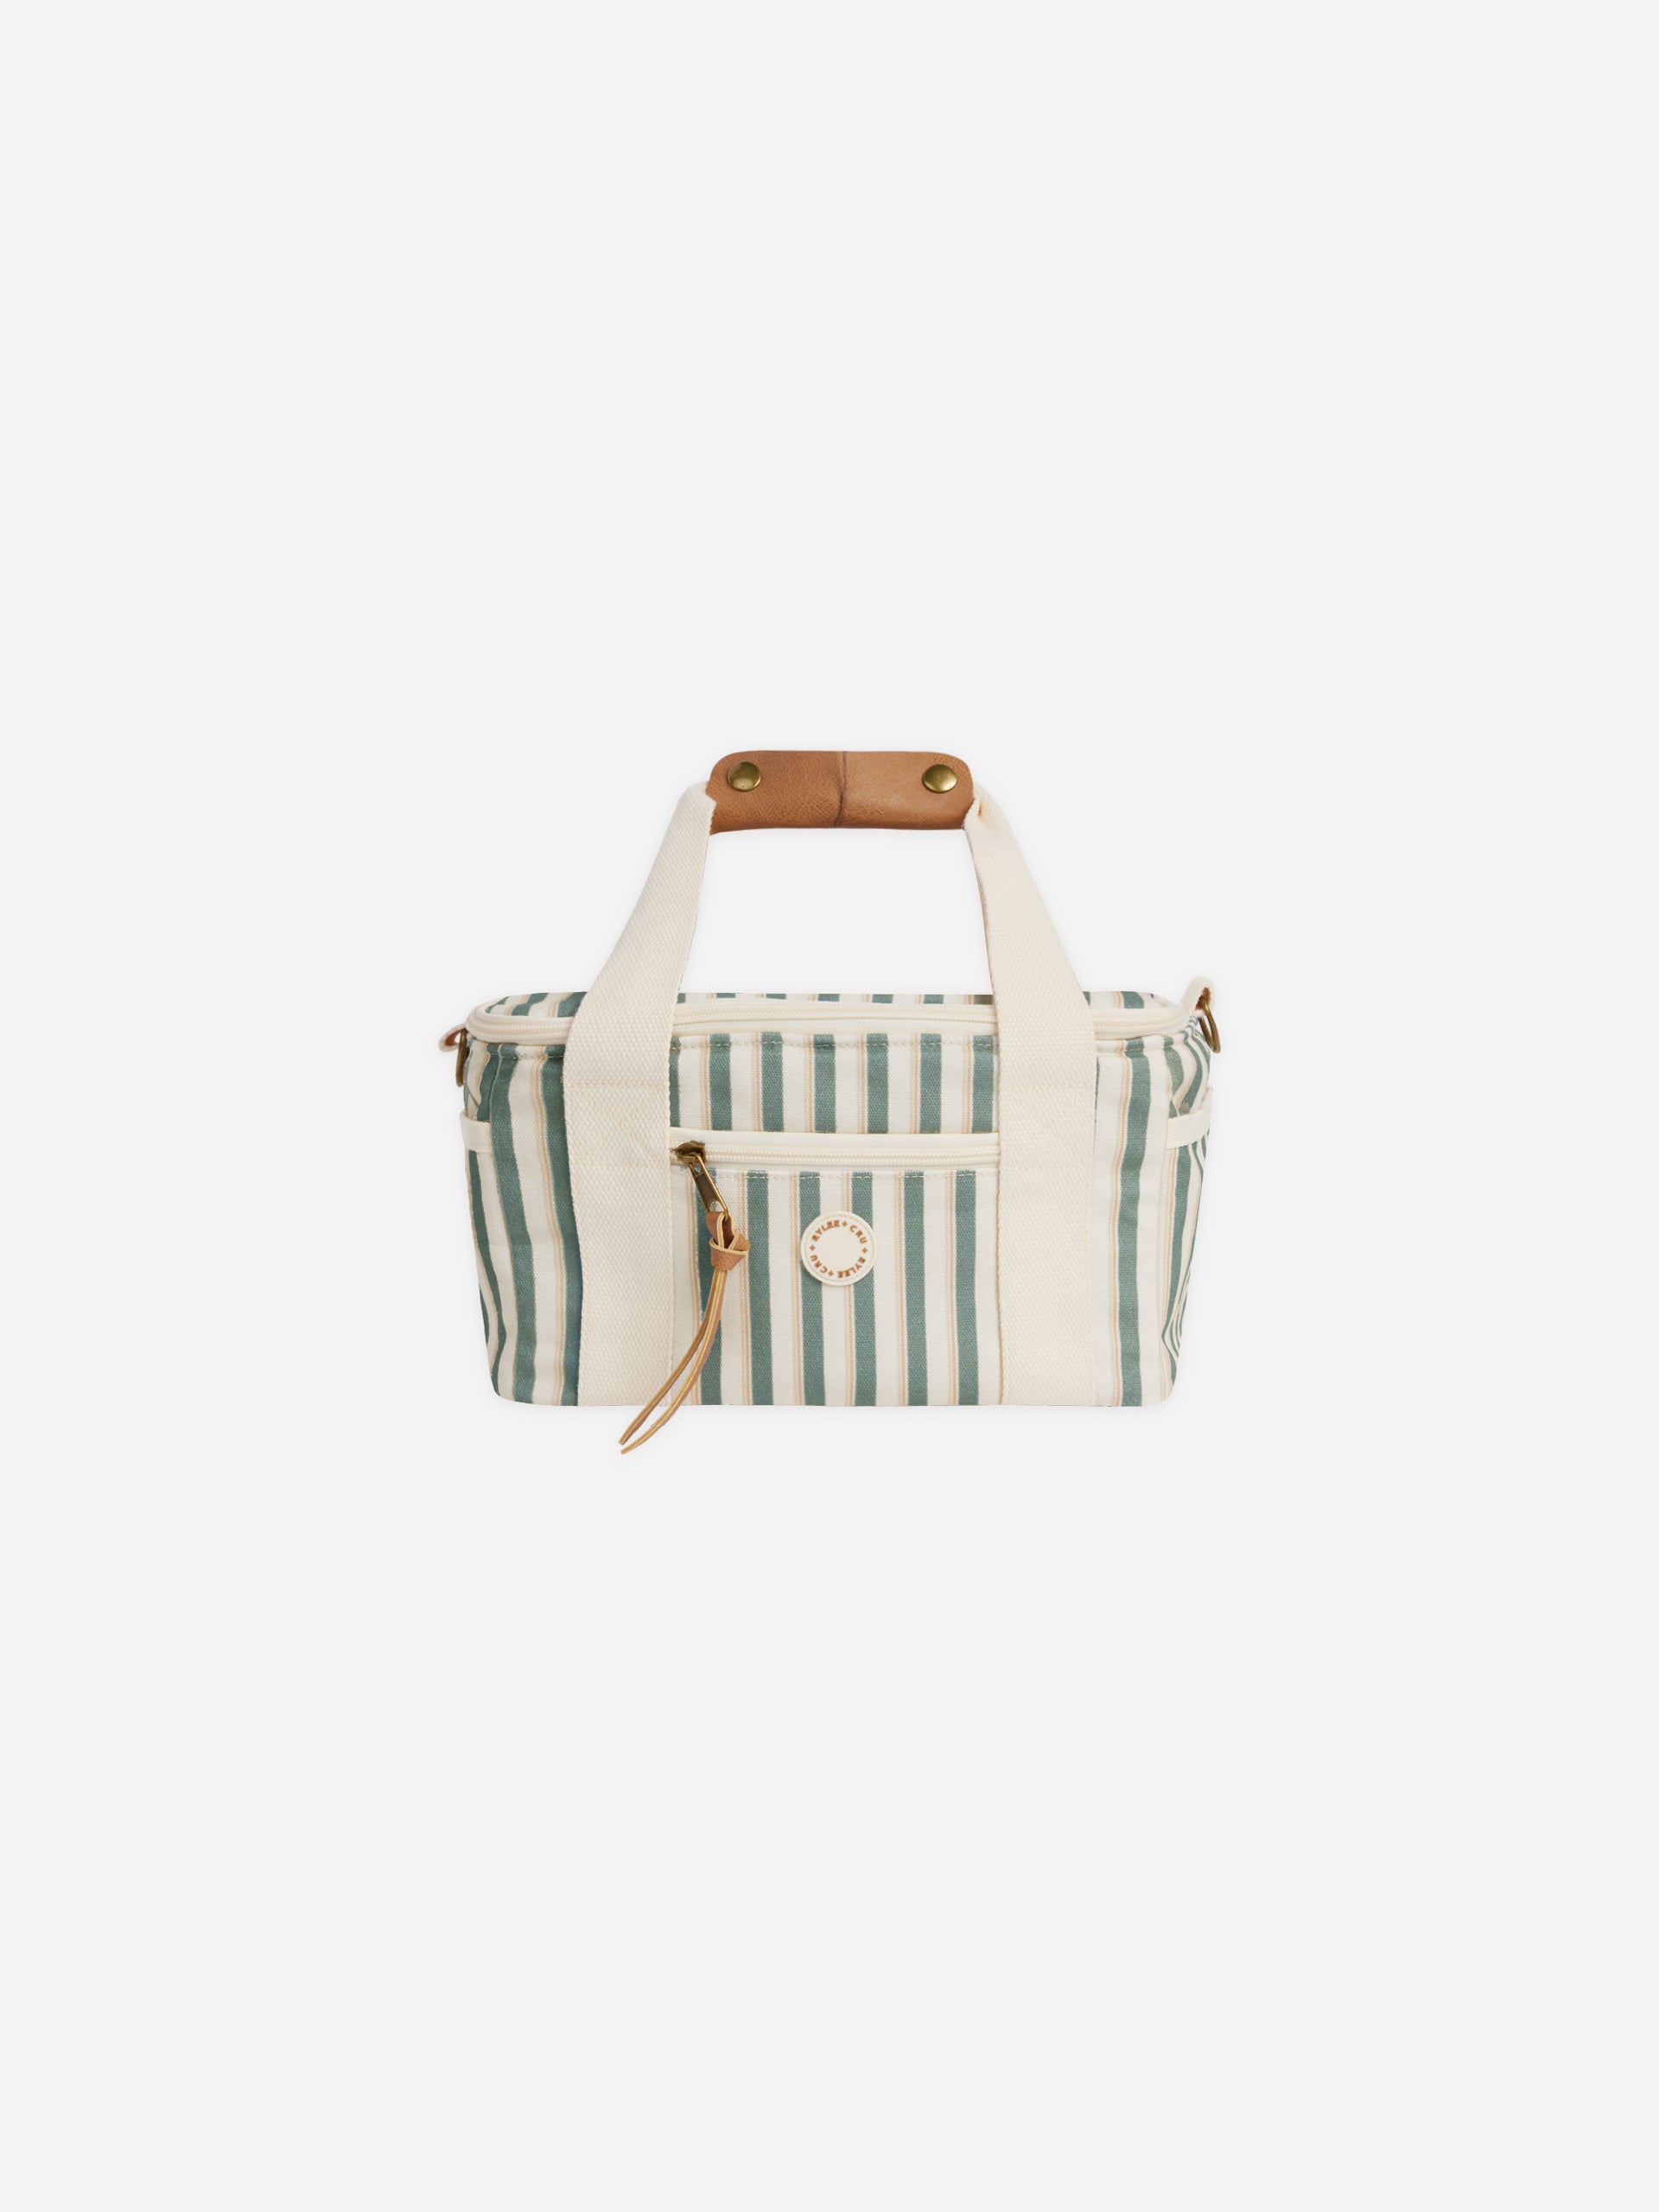 Cooler Bag || Aqua Stripe - Rylee + Cru | Kids Clothes | Trendy Baby Clothes | Modern Infant Outfits |